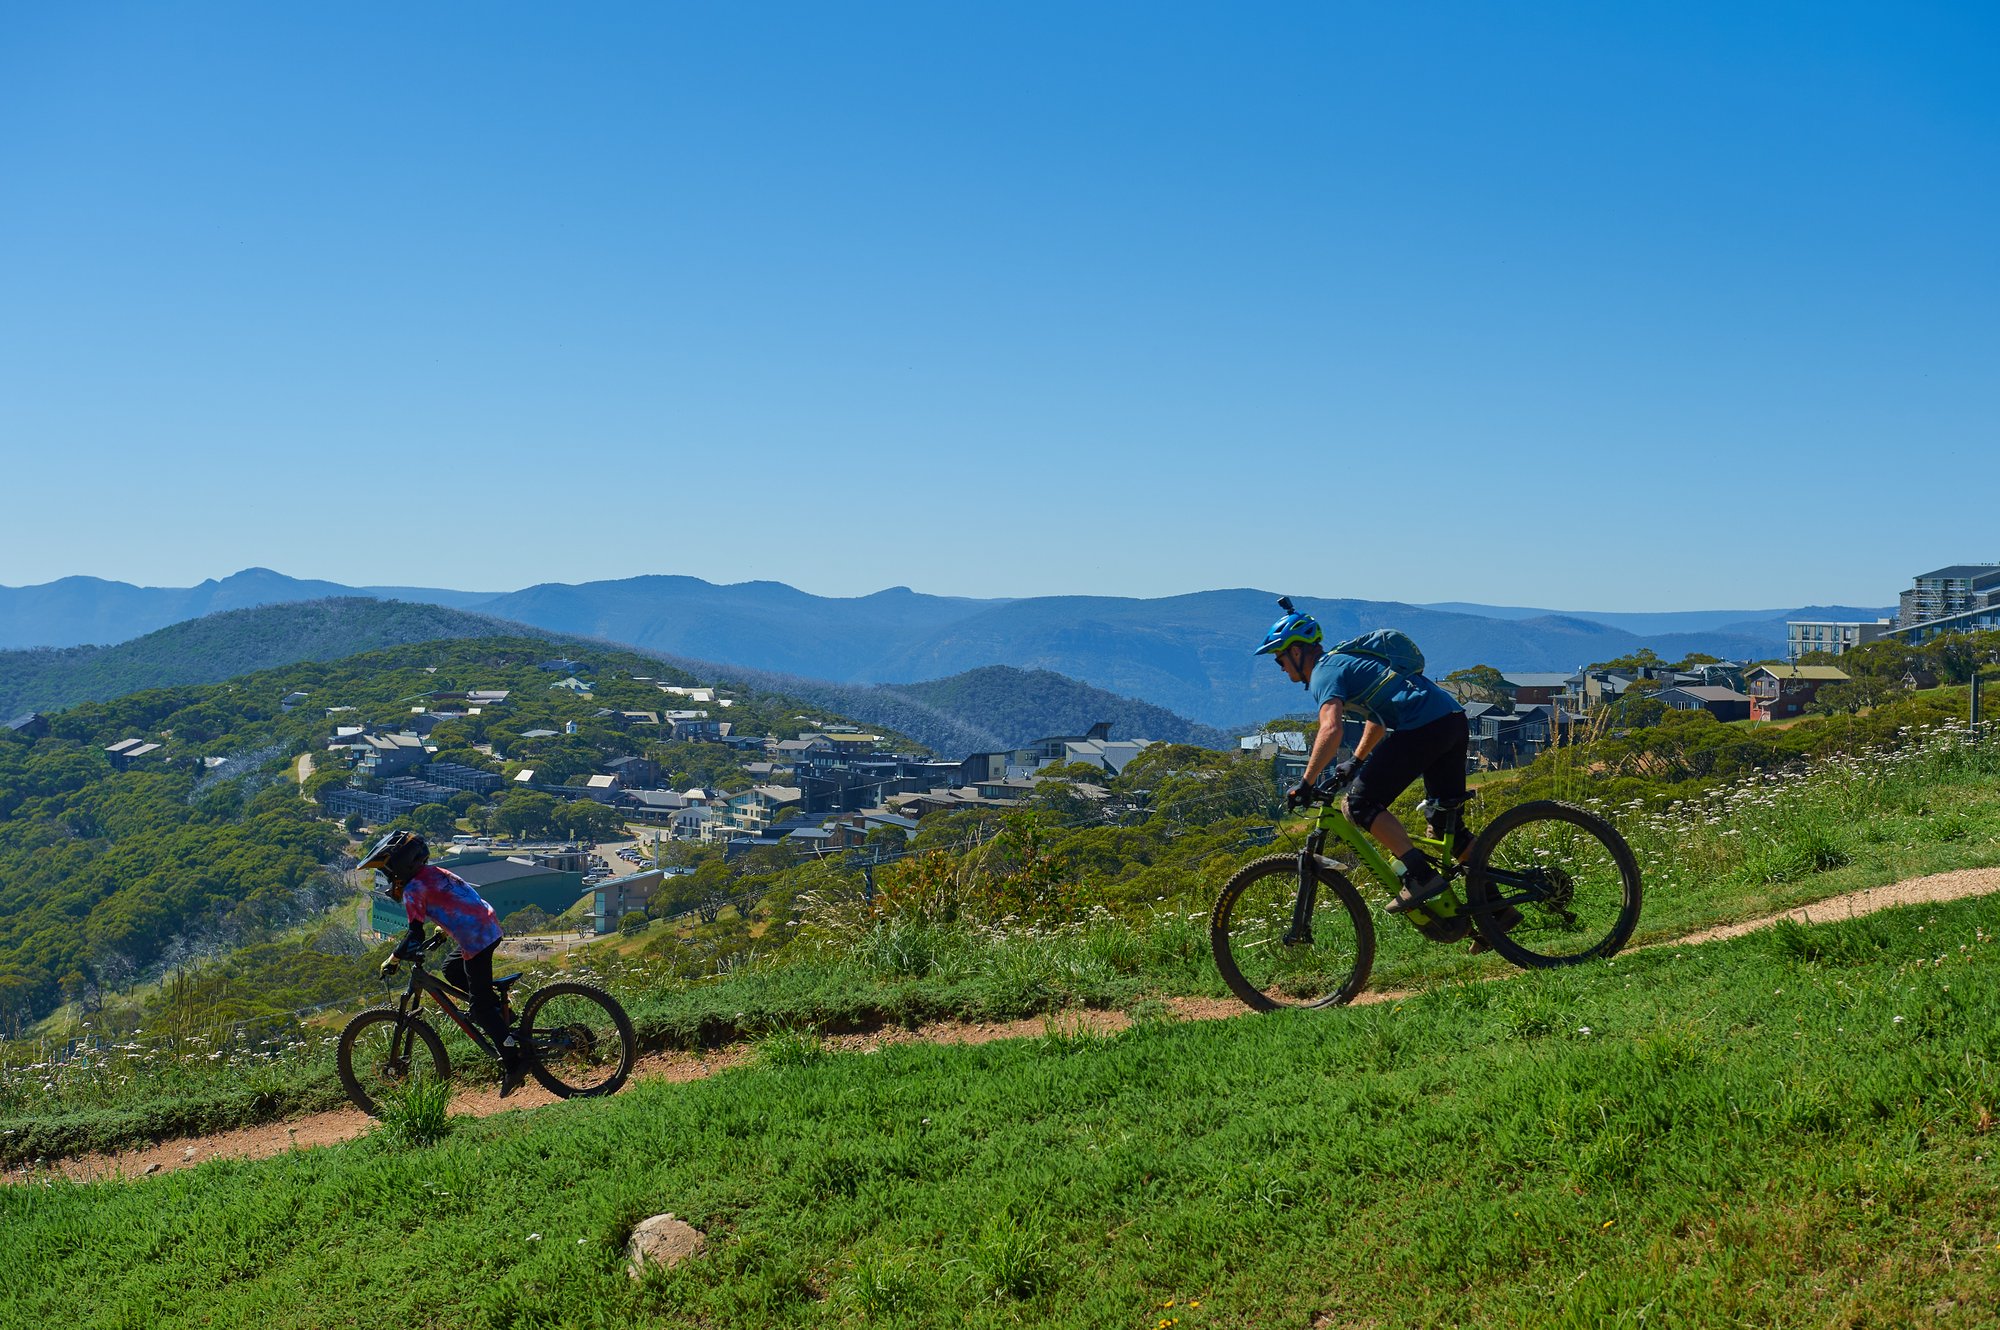 Two mountain bikers riding a single trail with the Mt Buller village and sweeping mountain views behind them